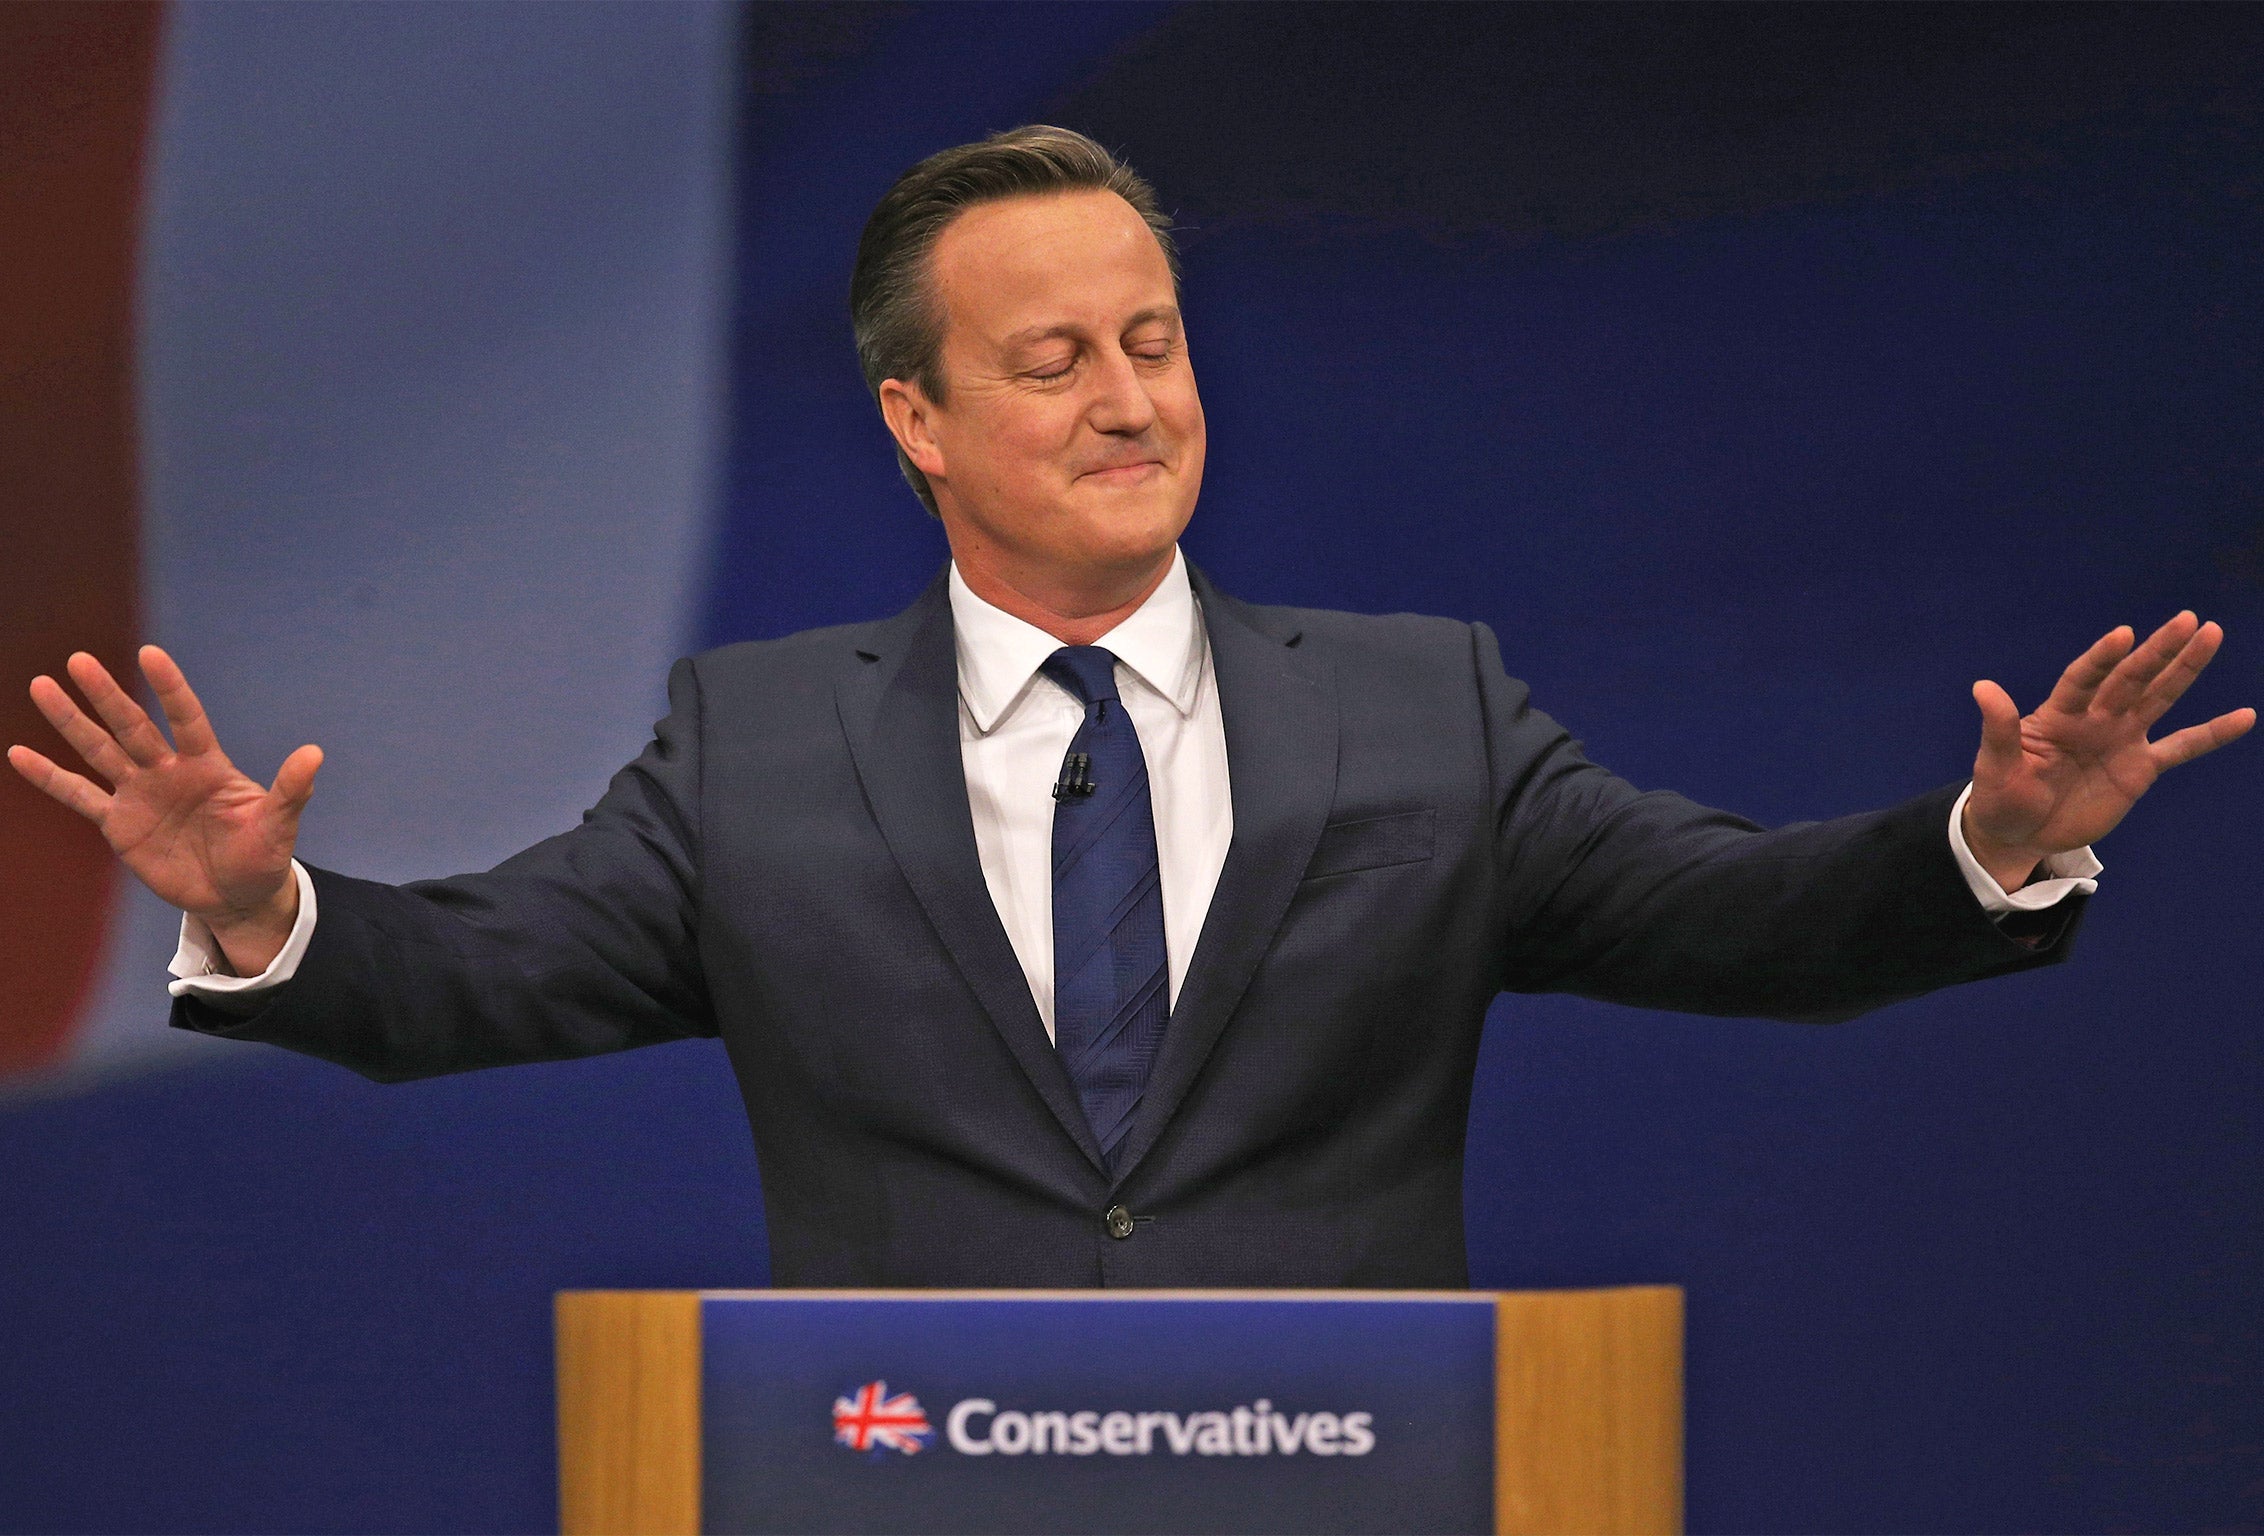 David Cameron appeals for calm during Wednesday's speech